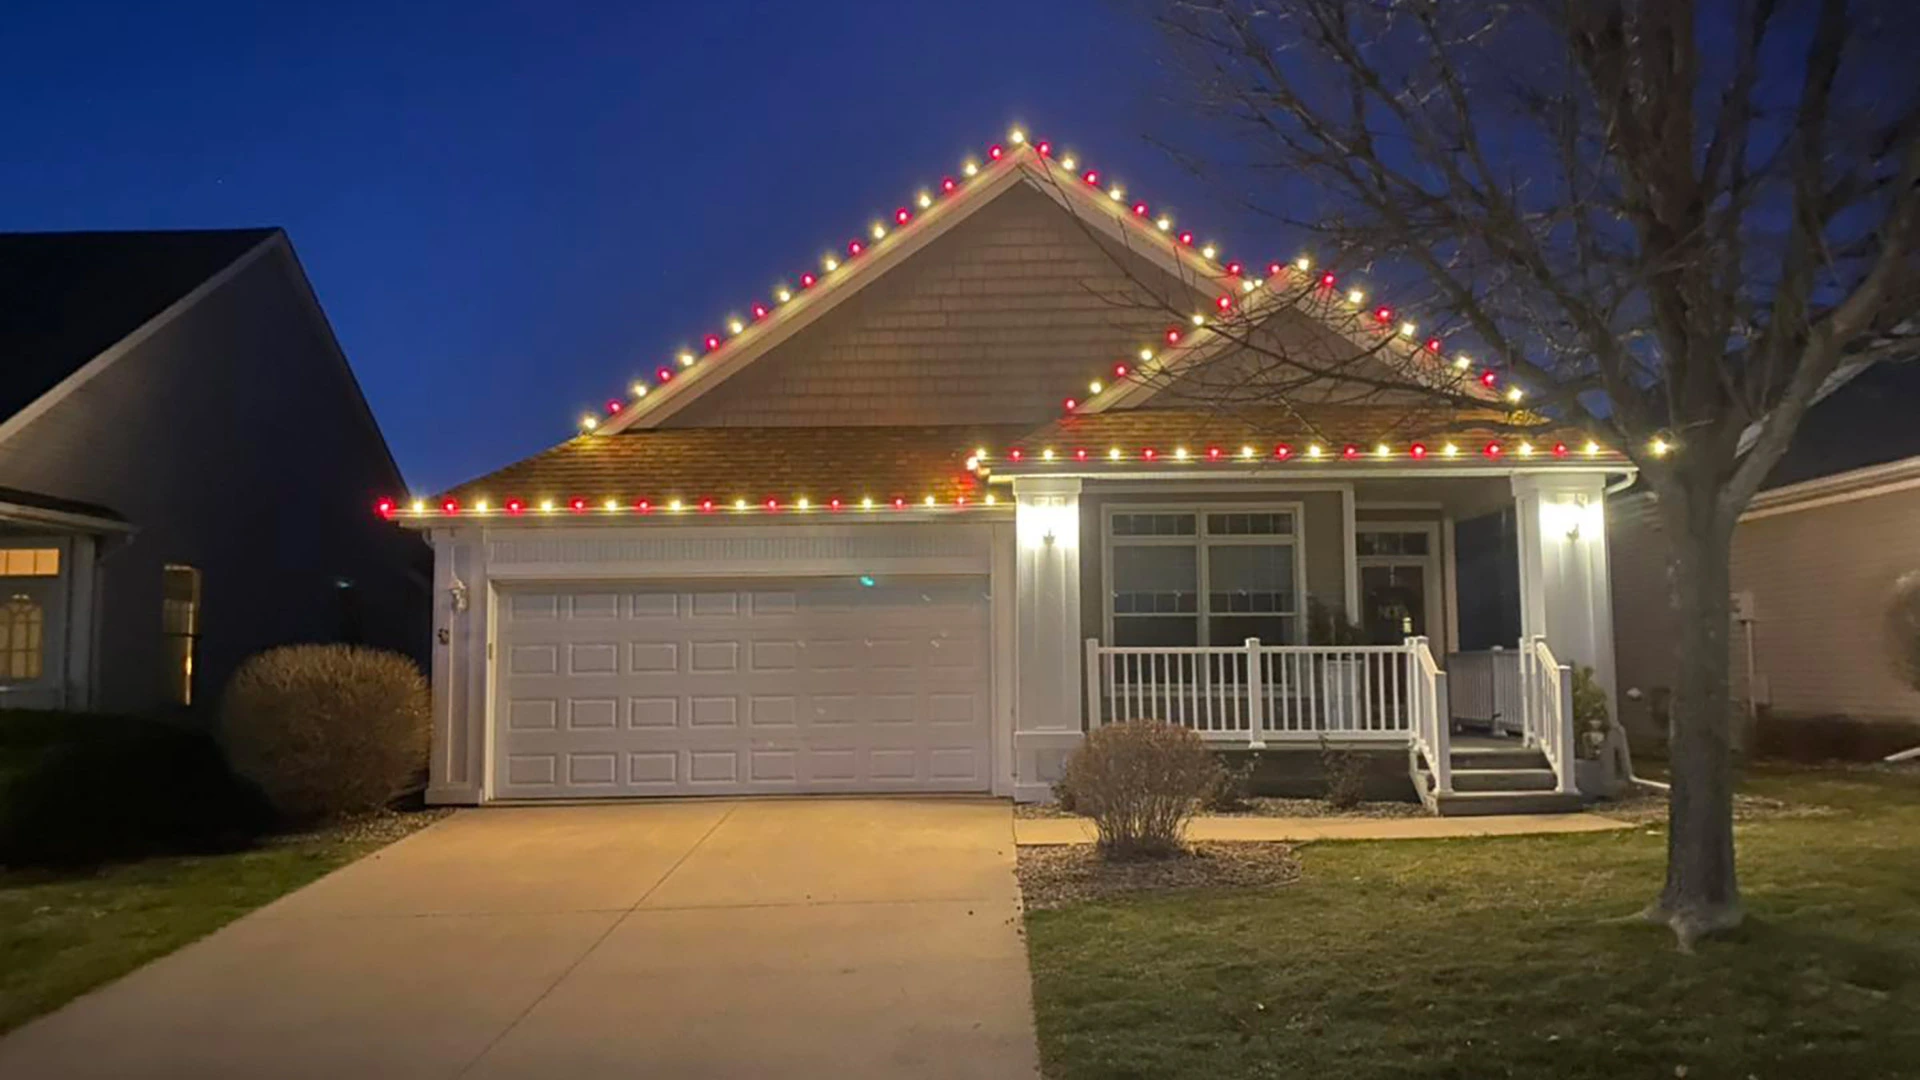 Holiday string lights added to home in Ankeny, IA.